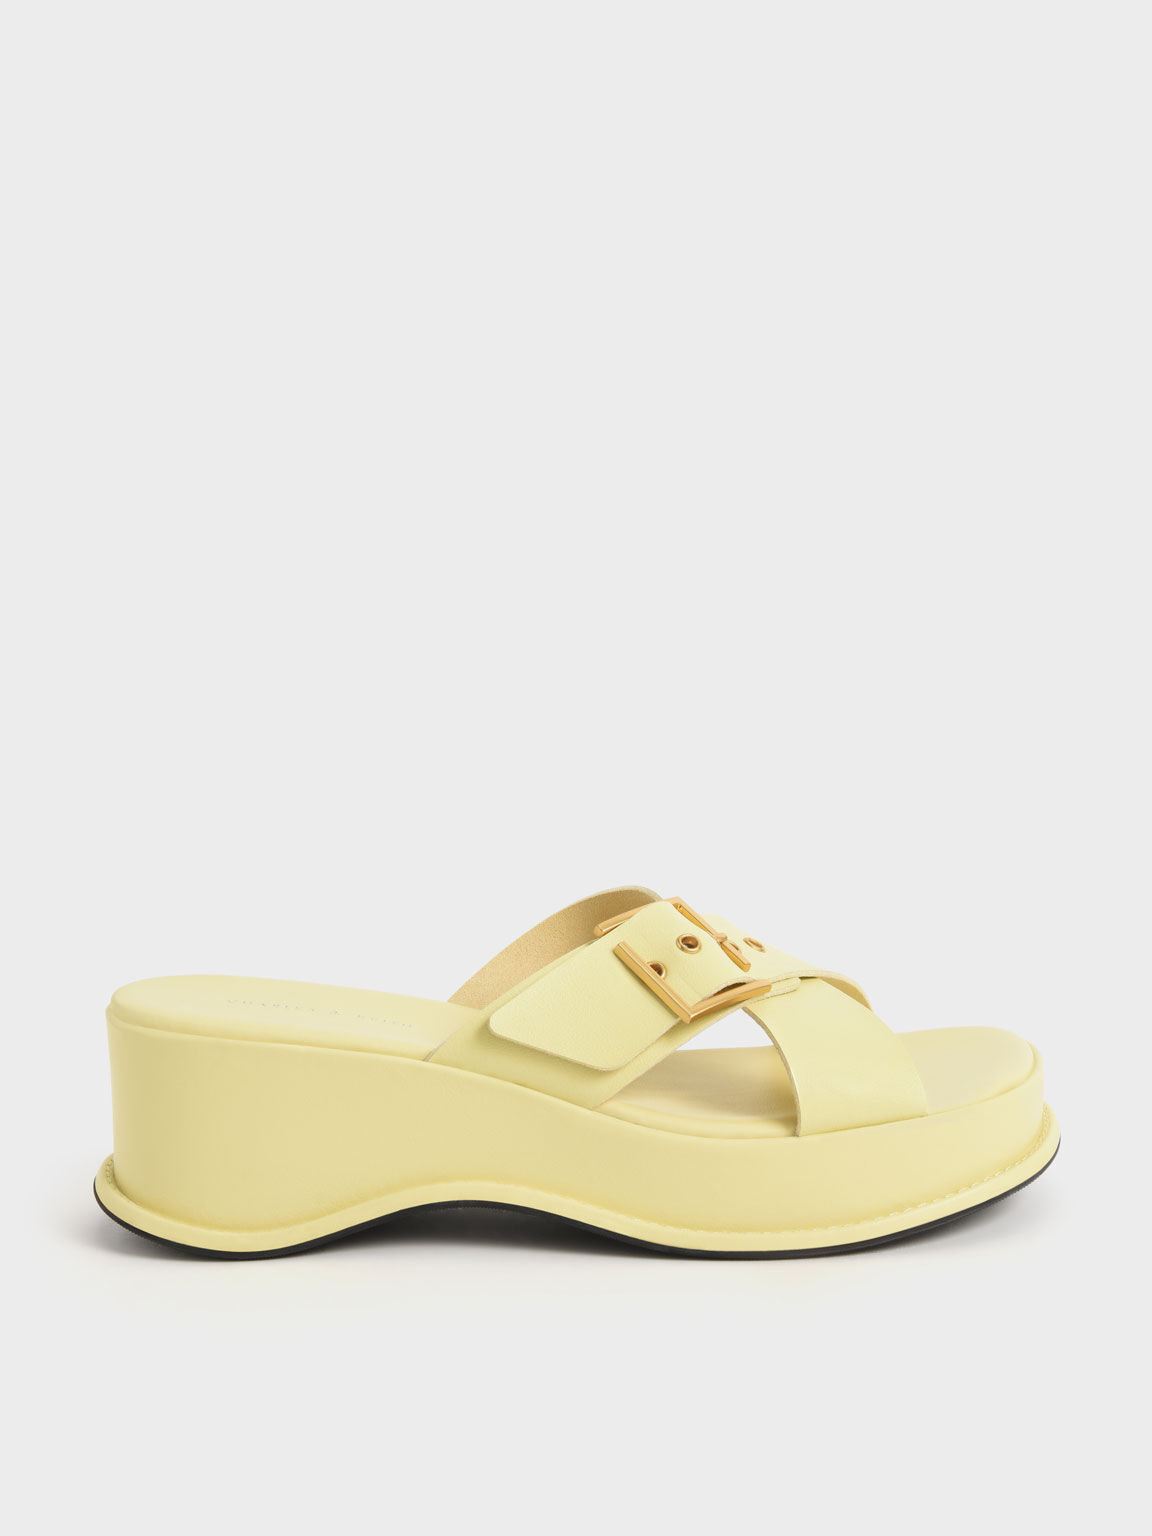 Buckled Crossover Curved Platform Sandals, Yellow, hi-res